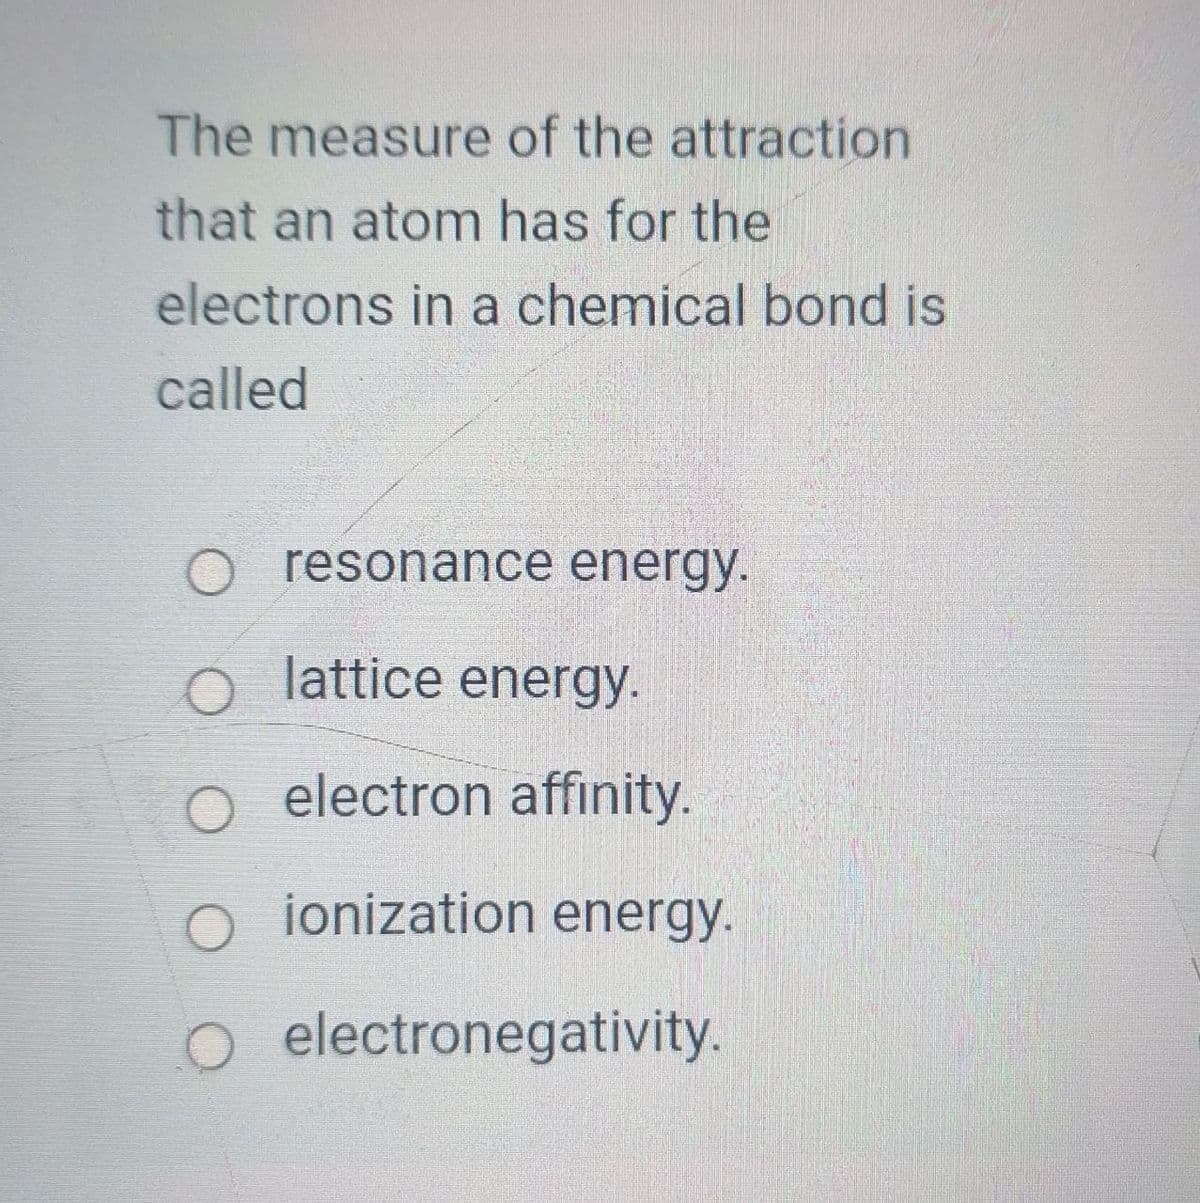 The measure of the attraction
that an atom has for the
electrons in a chemical bond is
called
resonance energy.
o lattice energy.
O electron affinity.
ionization energy.
electronegativity.
